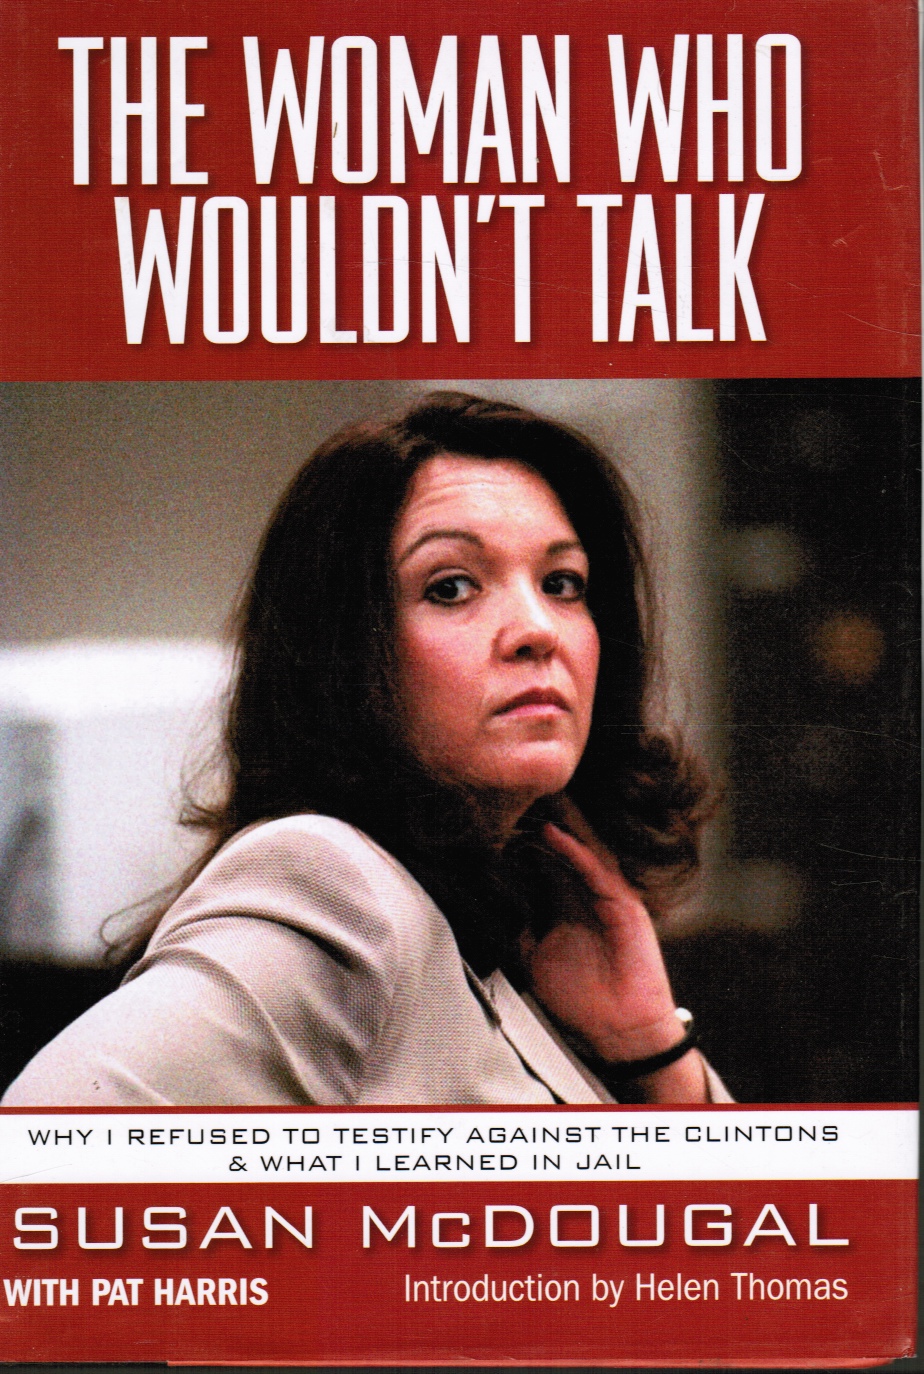 MCDOUGAL, SUSAN & HELEN THOMAS; HARRIS, PAT - The Woman Who Wouldn't Talk: Why I Refused to Testify Against the Clintons and What I Learned in Jail